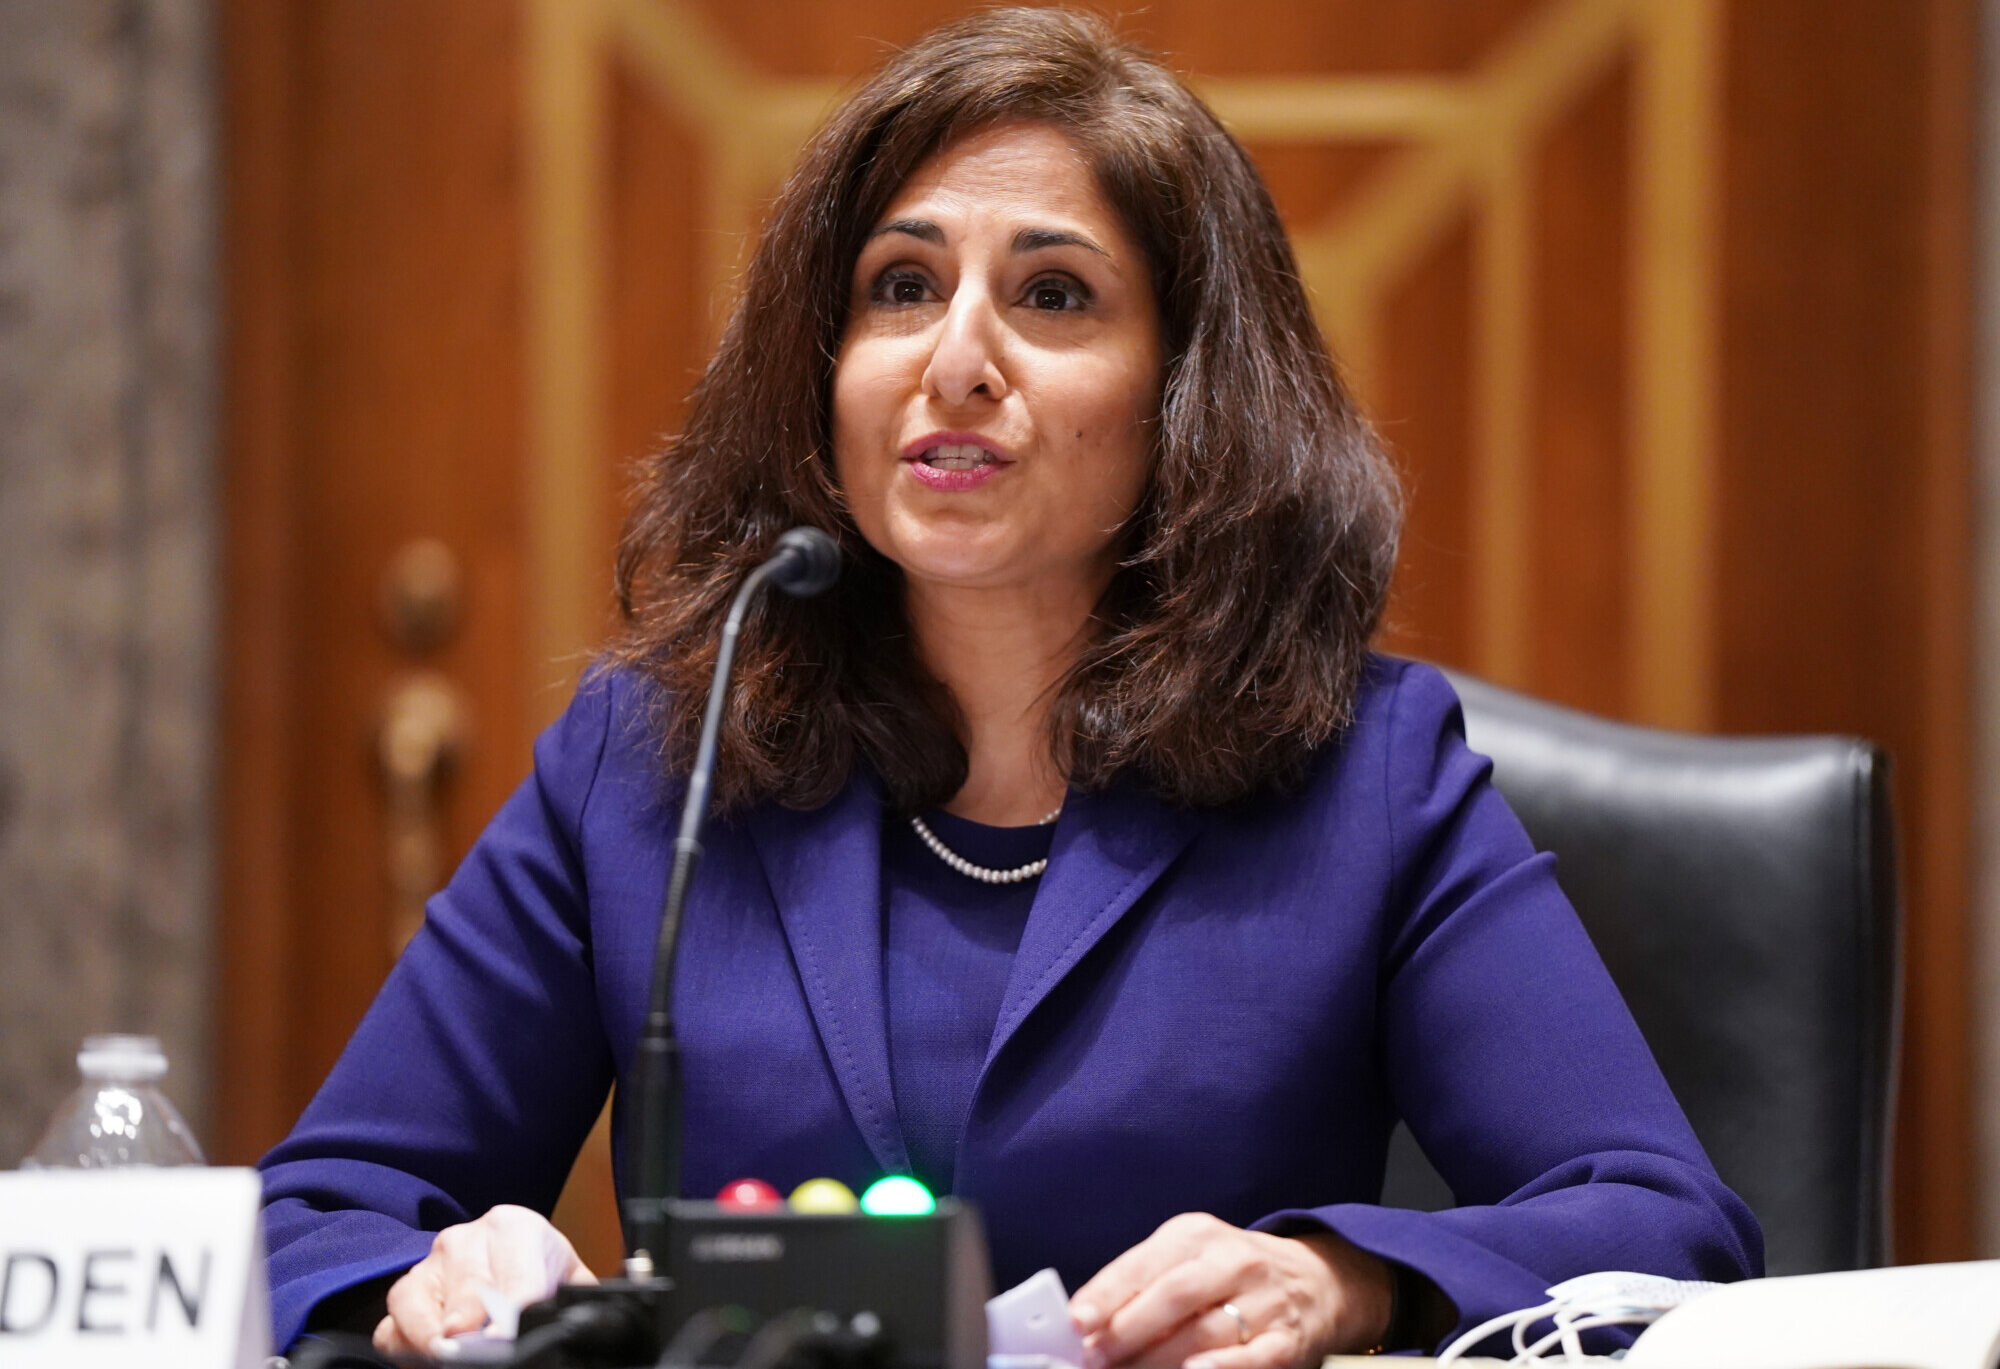 Senate Reschedules Neera Tanden Confirmation Vote as White House Holds Firm